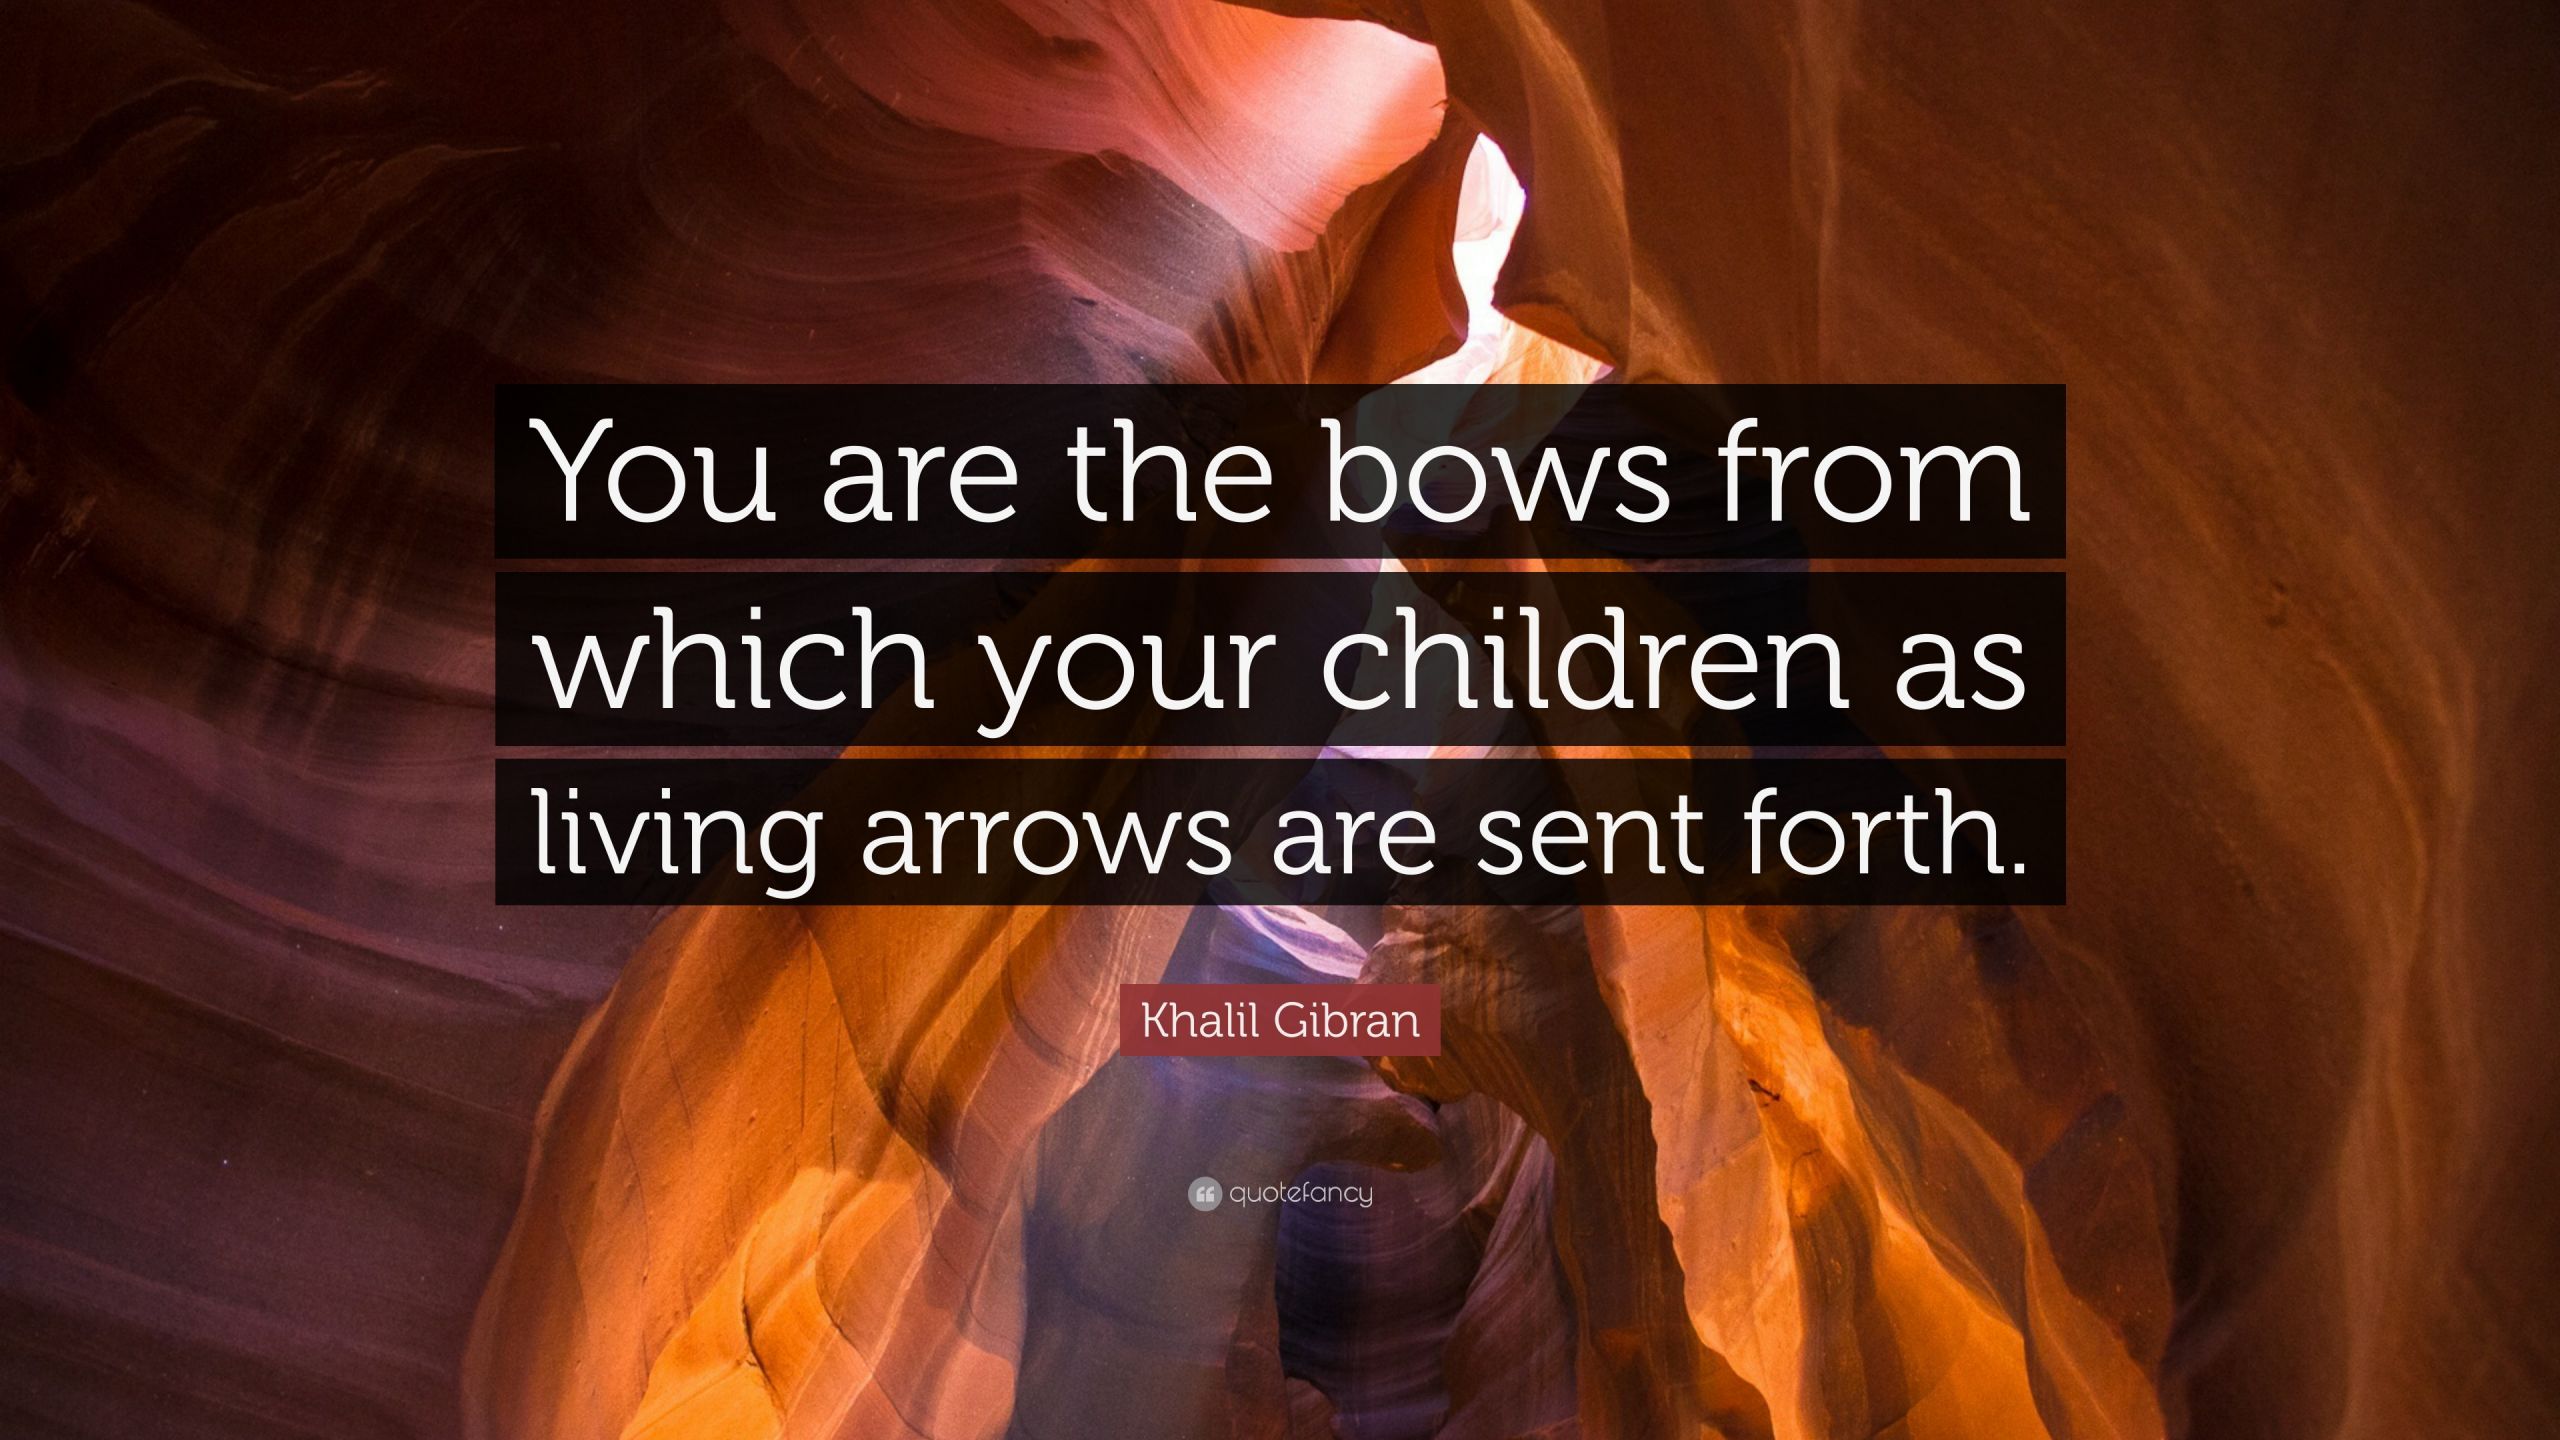 Khalil Gibran Quote On Children
 Khalil Gibran Quote “You are the bows from which your